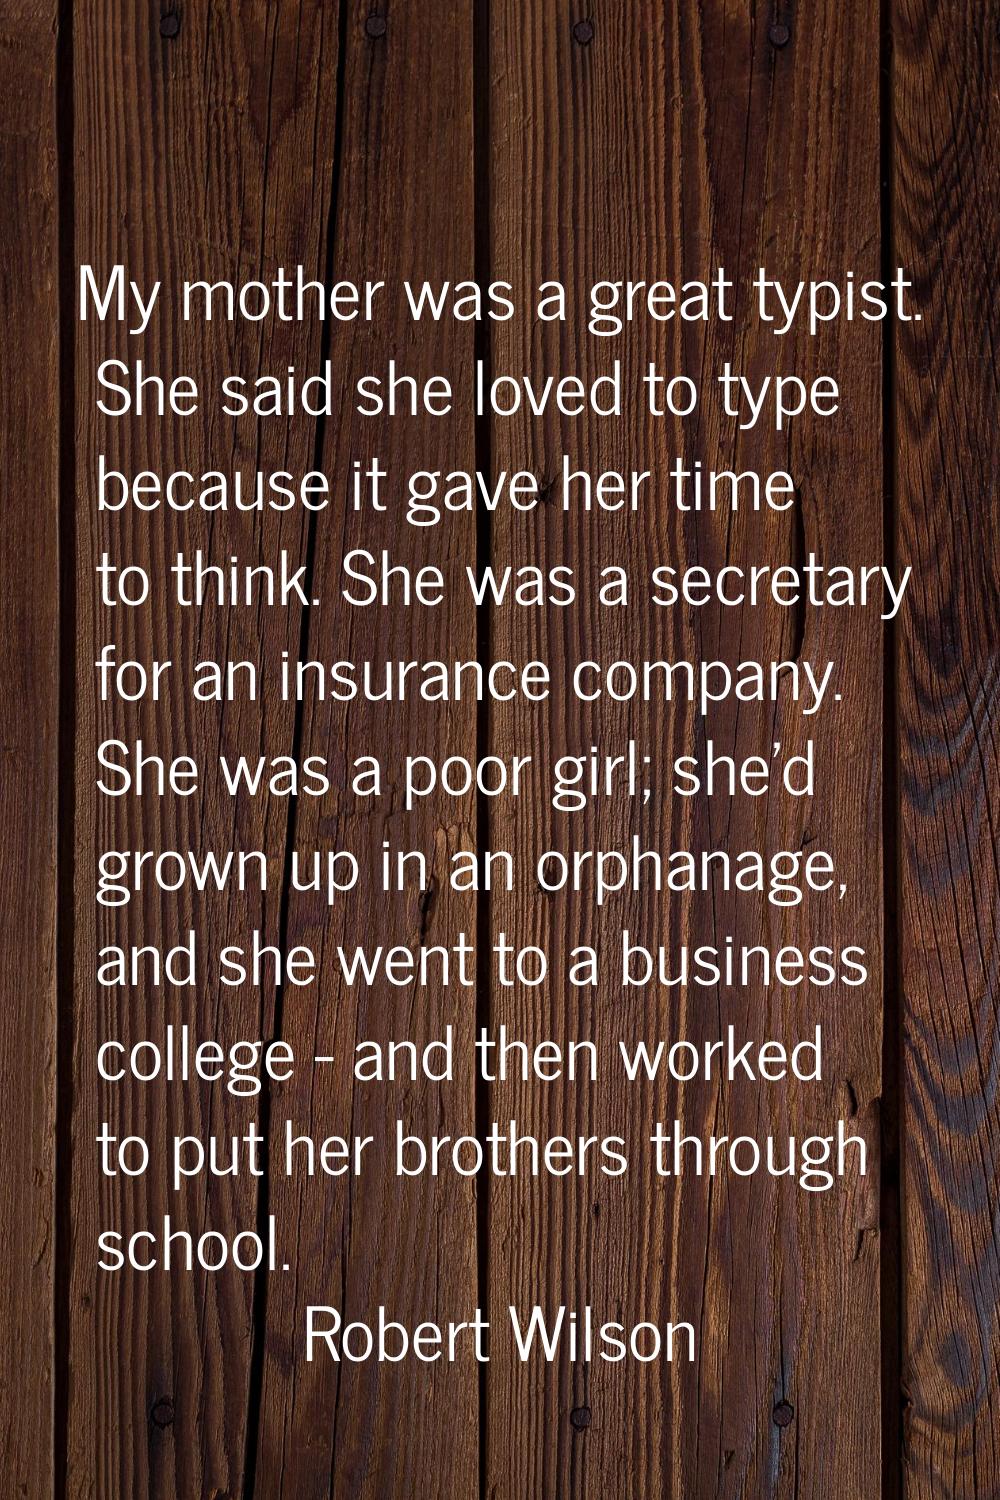 My mother was a great typist. She said she loved to type because it gave her time to think. She was